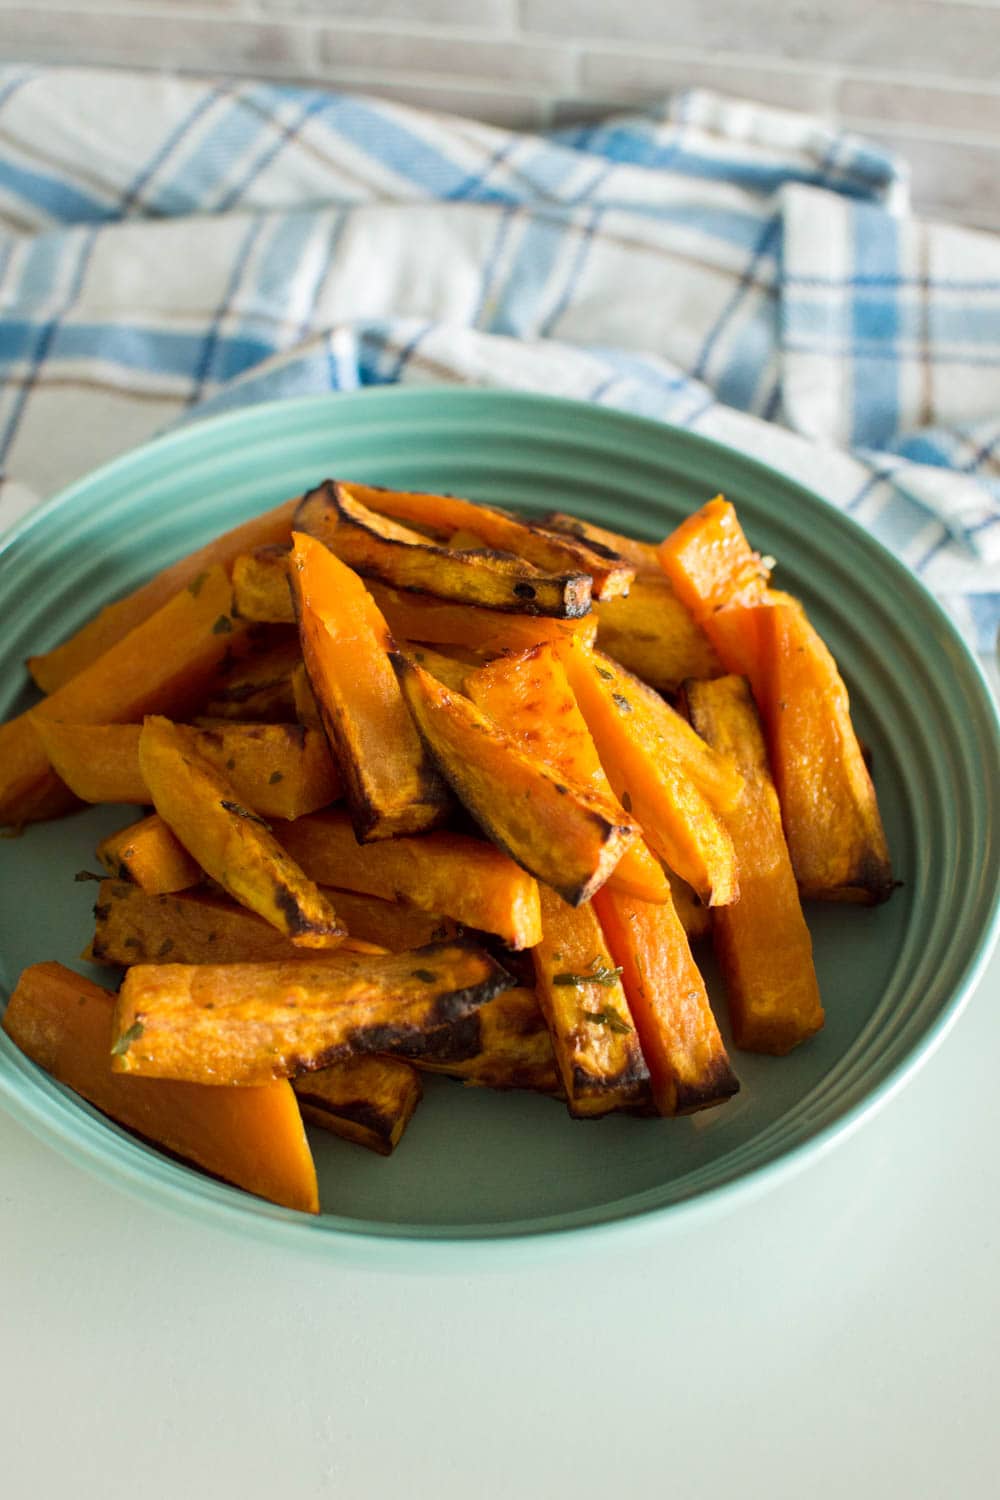 Sweet potato fries served in a green bowl